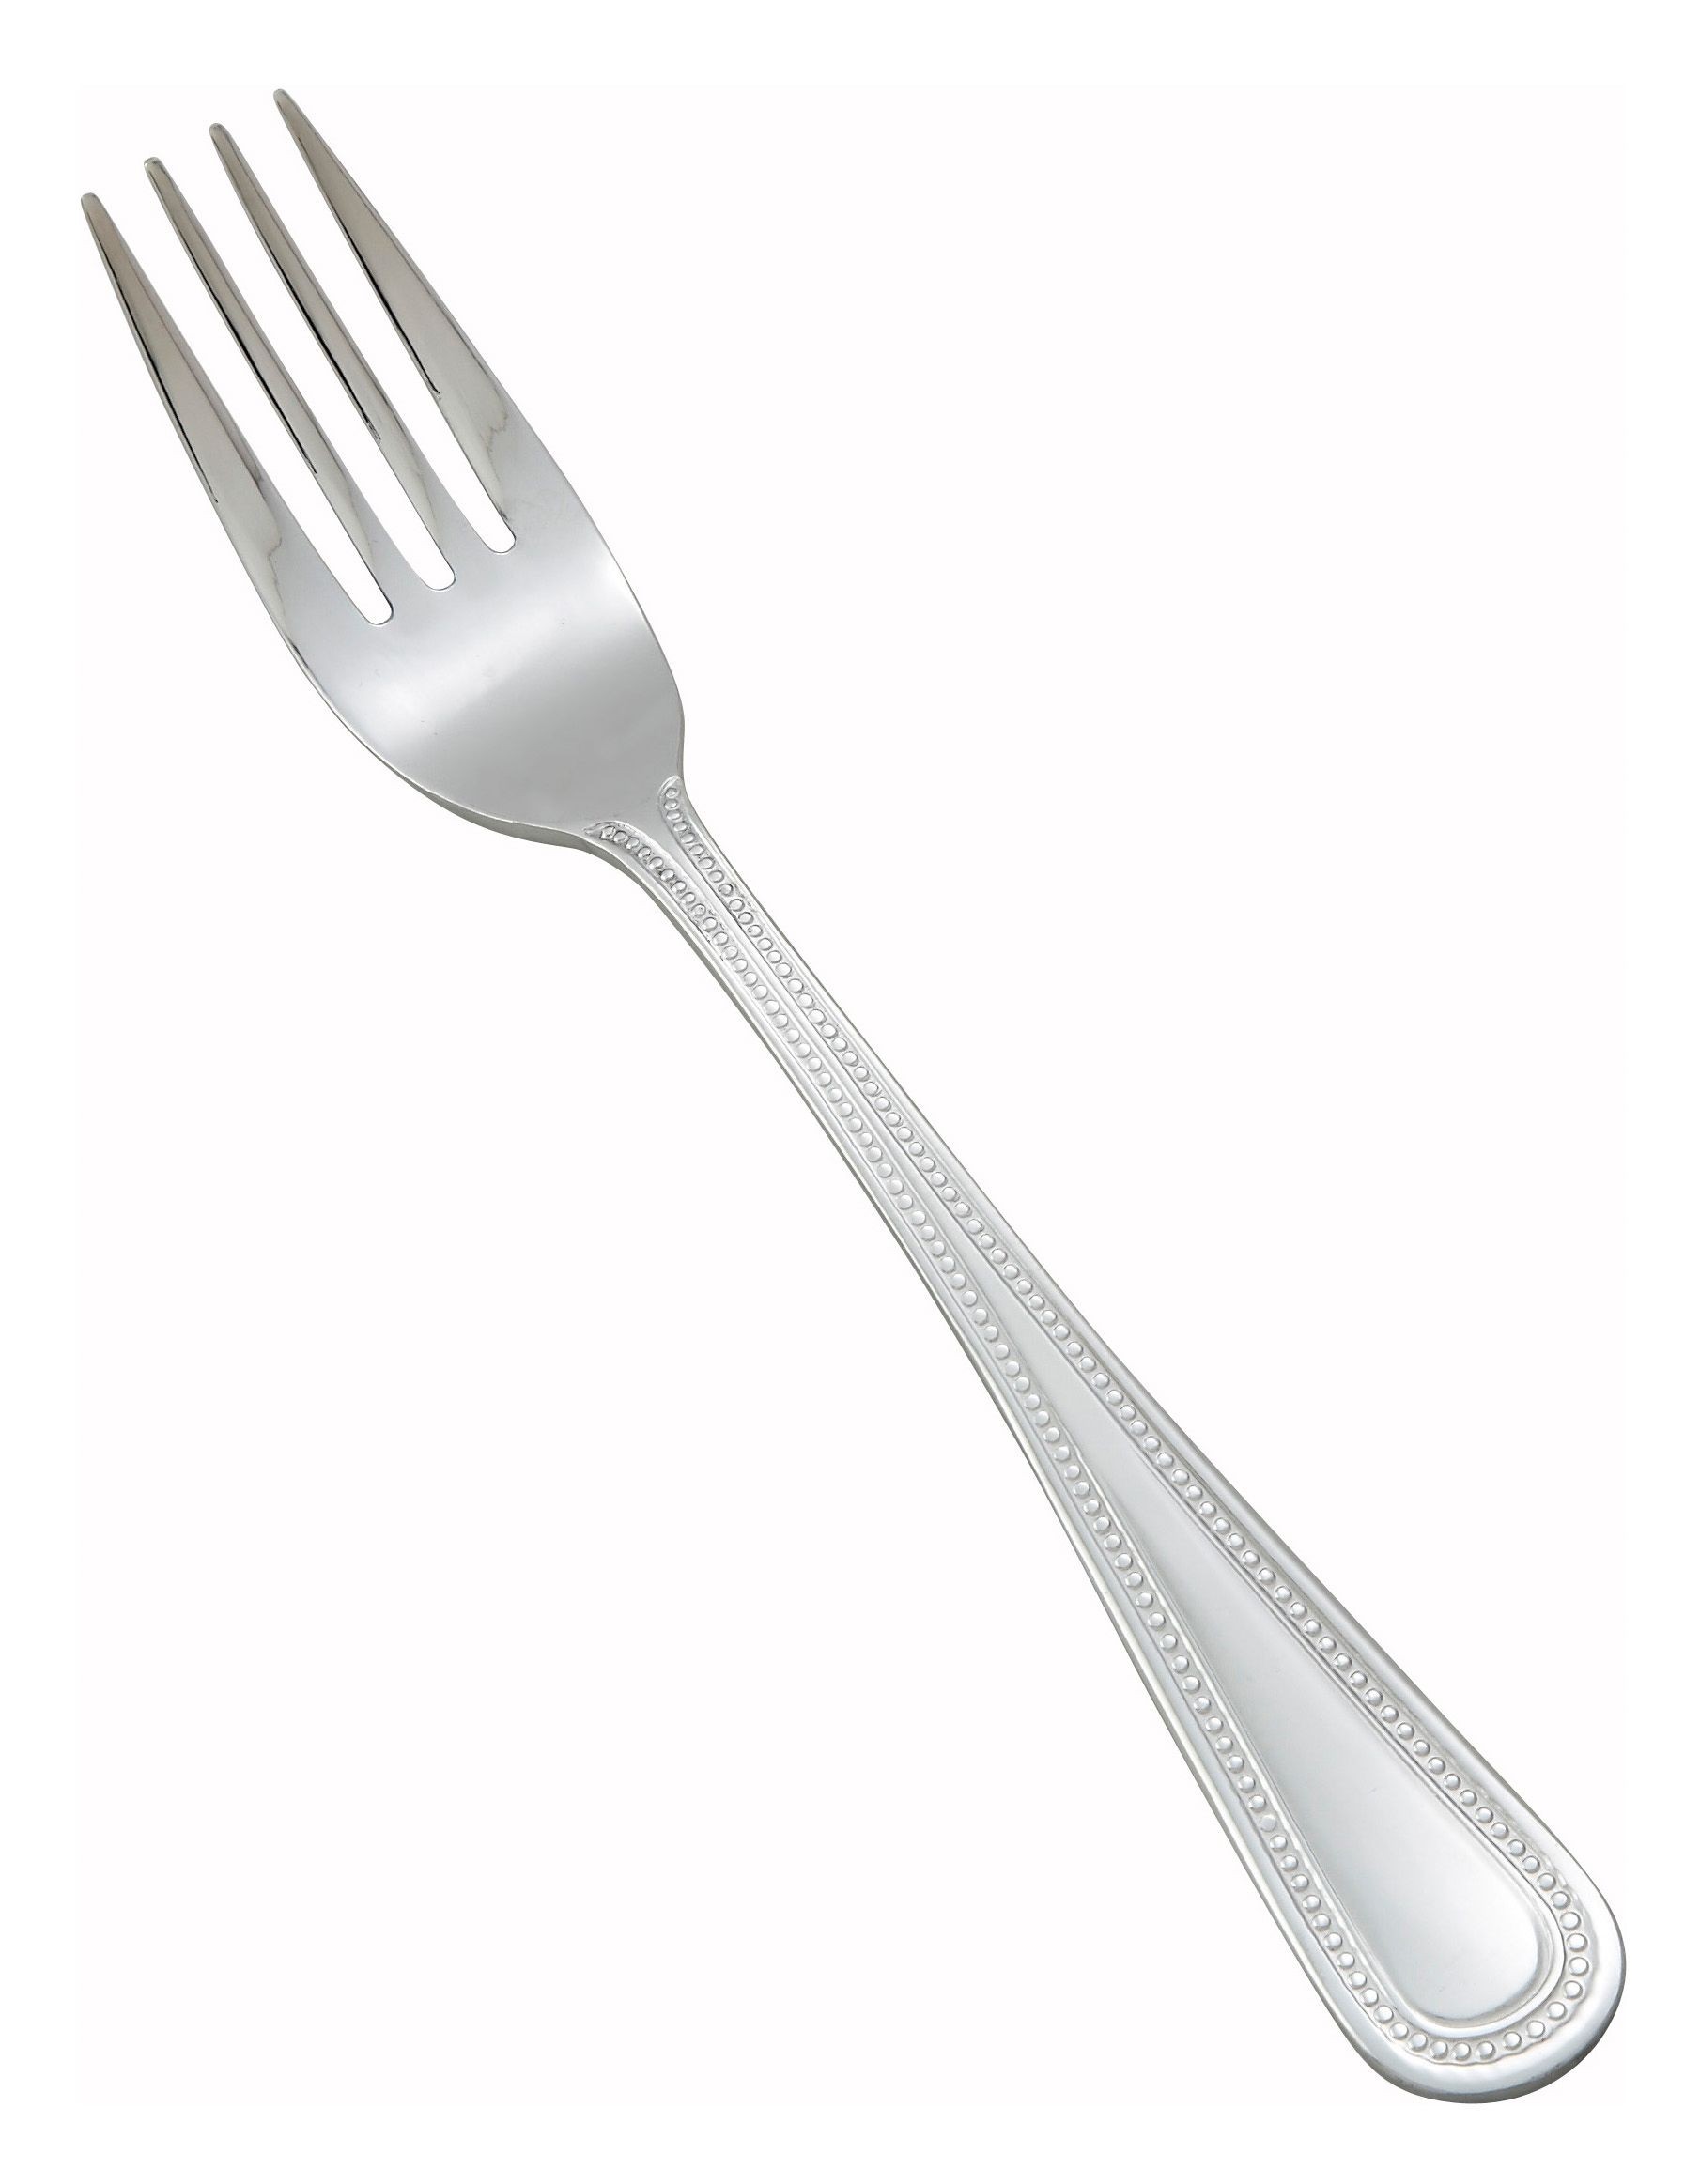 Winco 0005-06 Dots Heavy Weight Mirror Finish Stainless Steel Salad Fork (12/Pack)